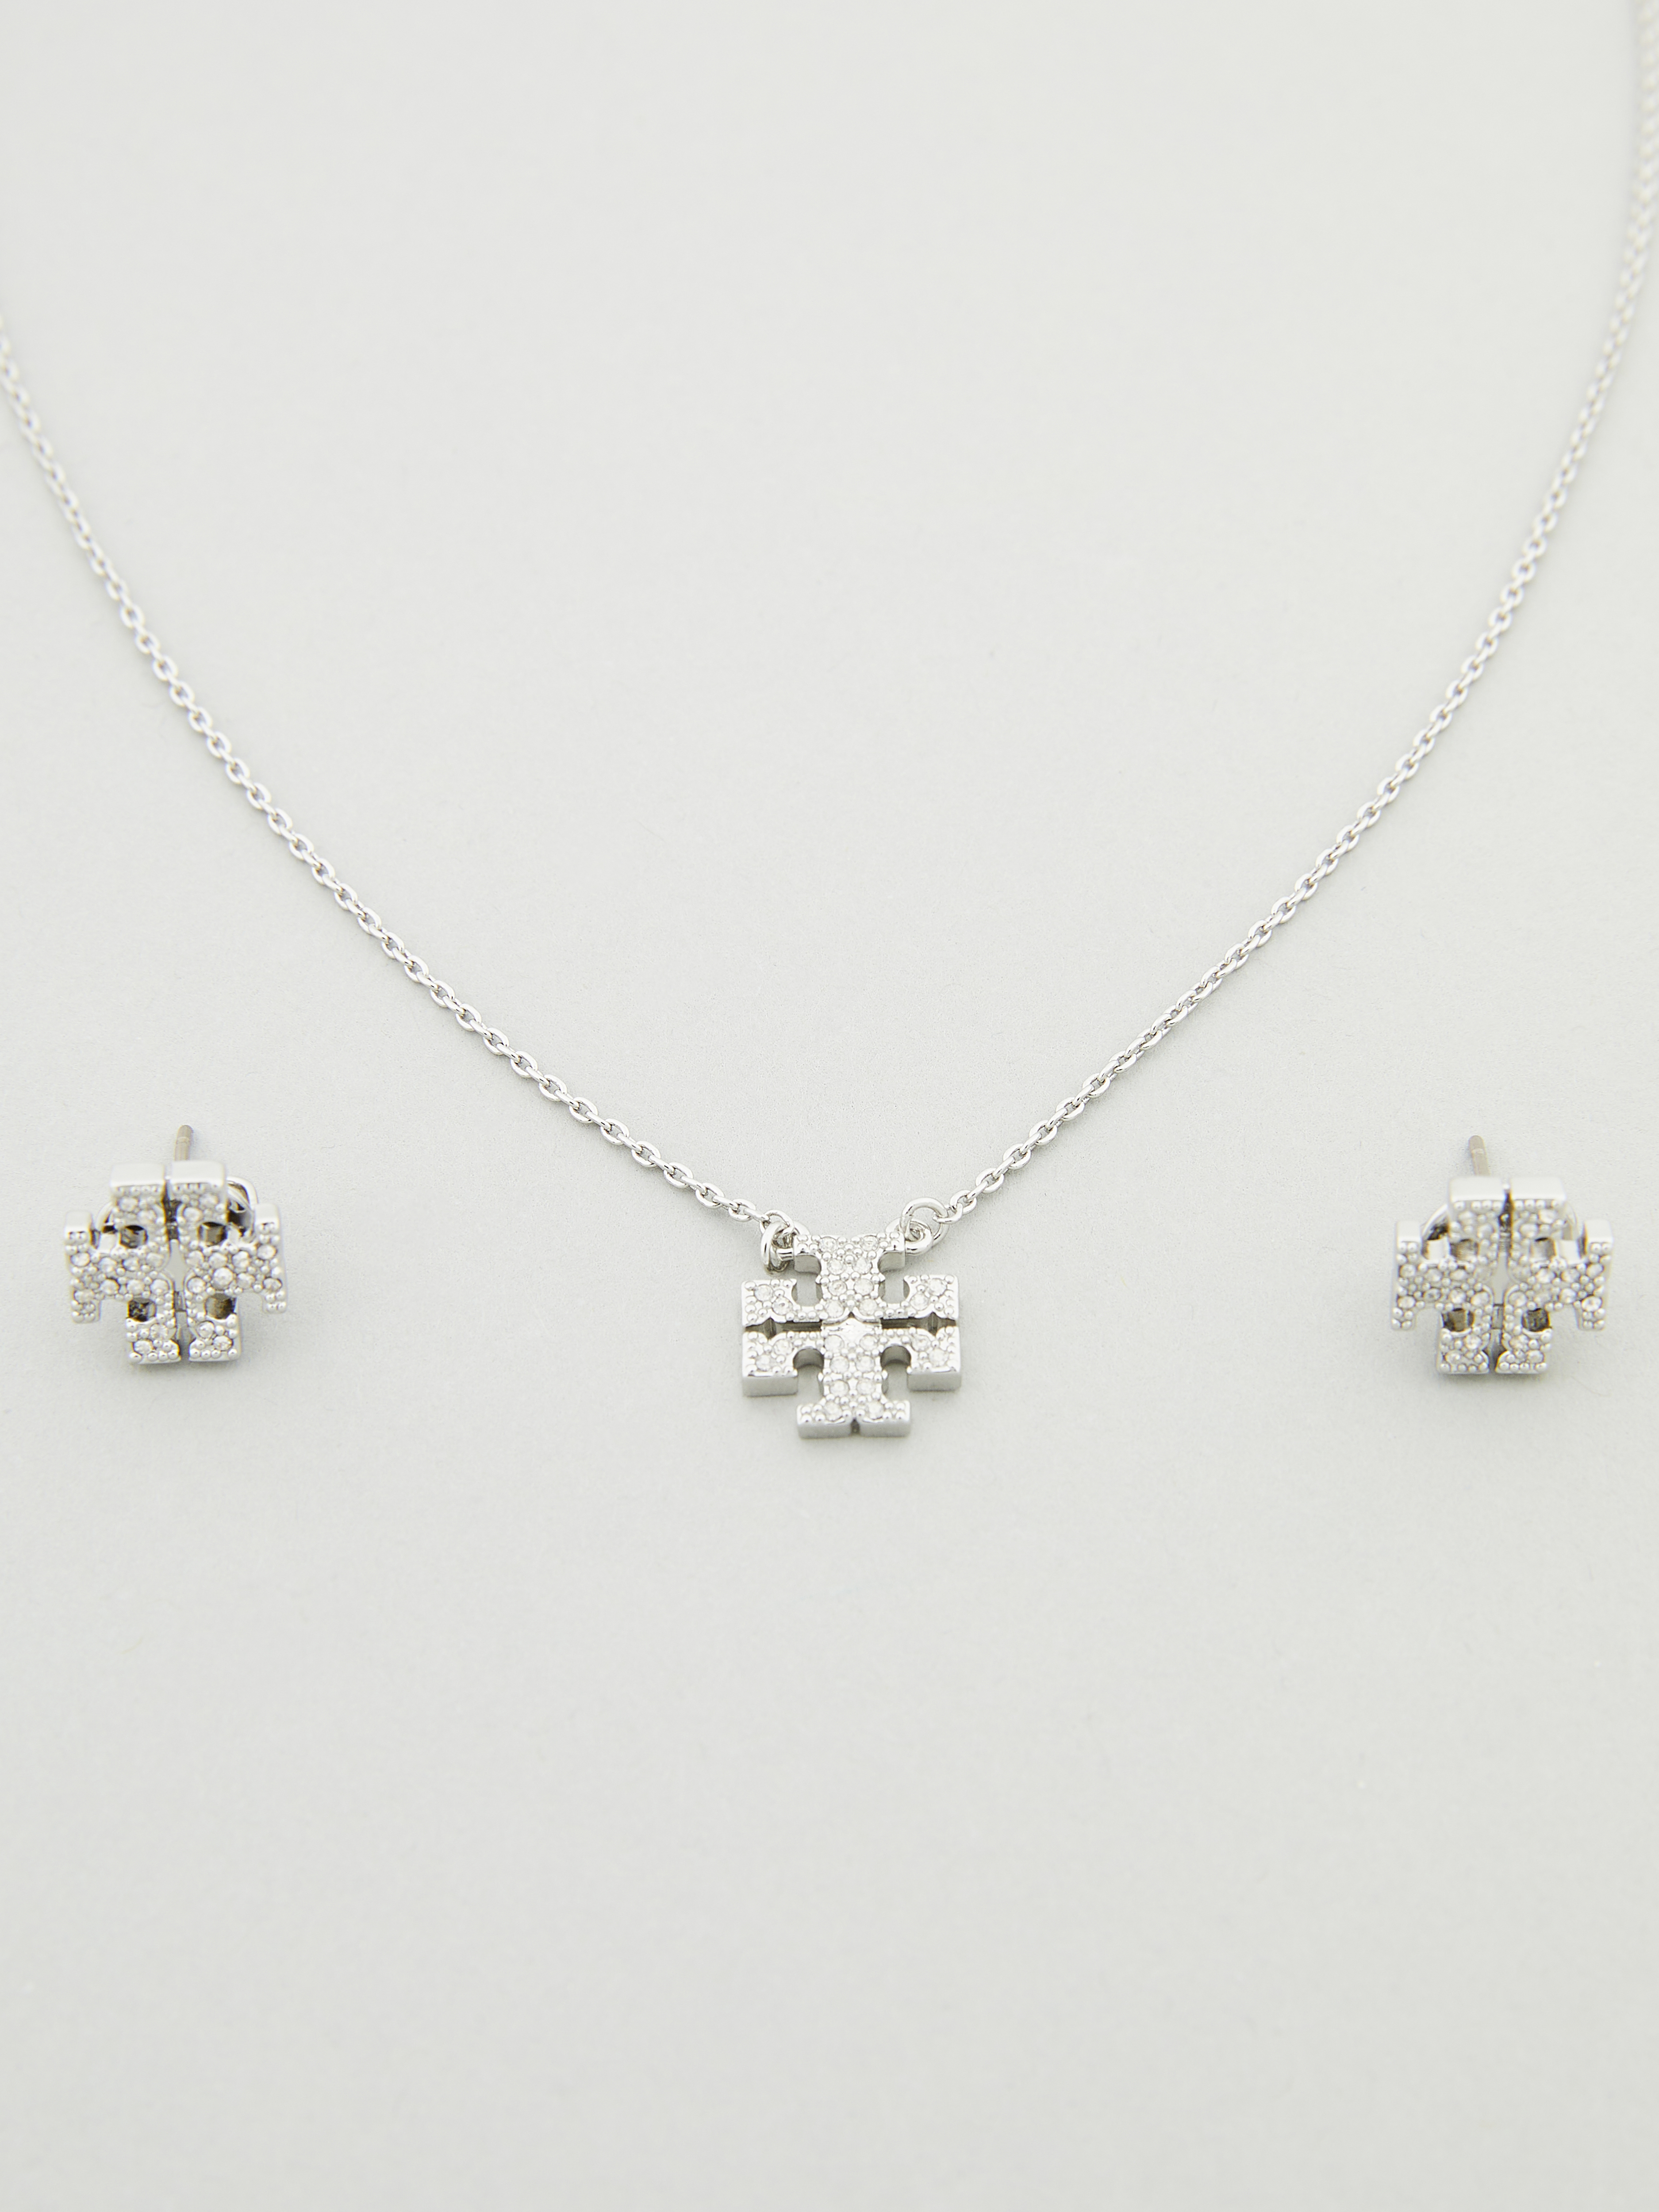 Tory Burch Set of stud earrings and necklace 'Kira' silver | Earrings